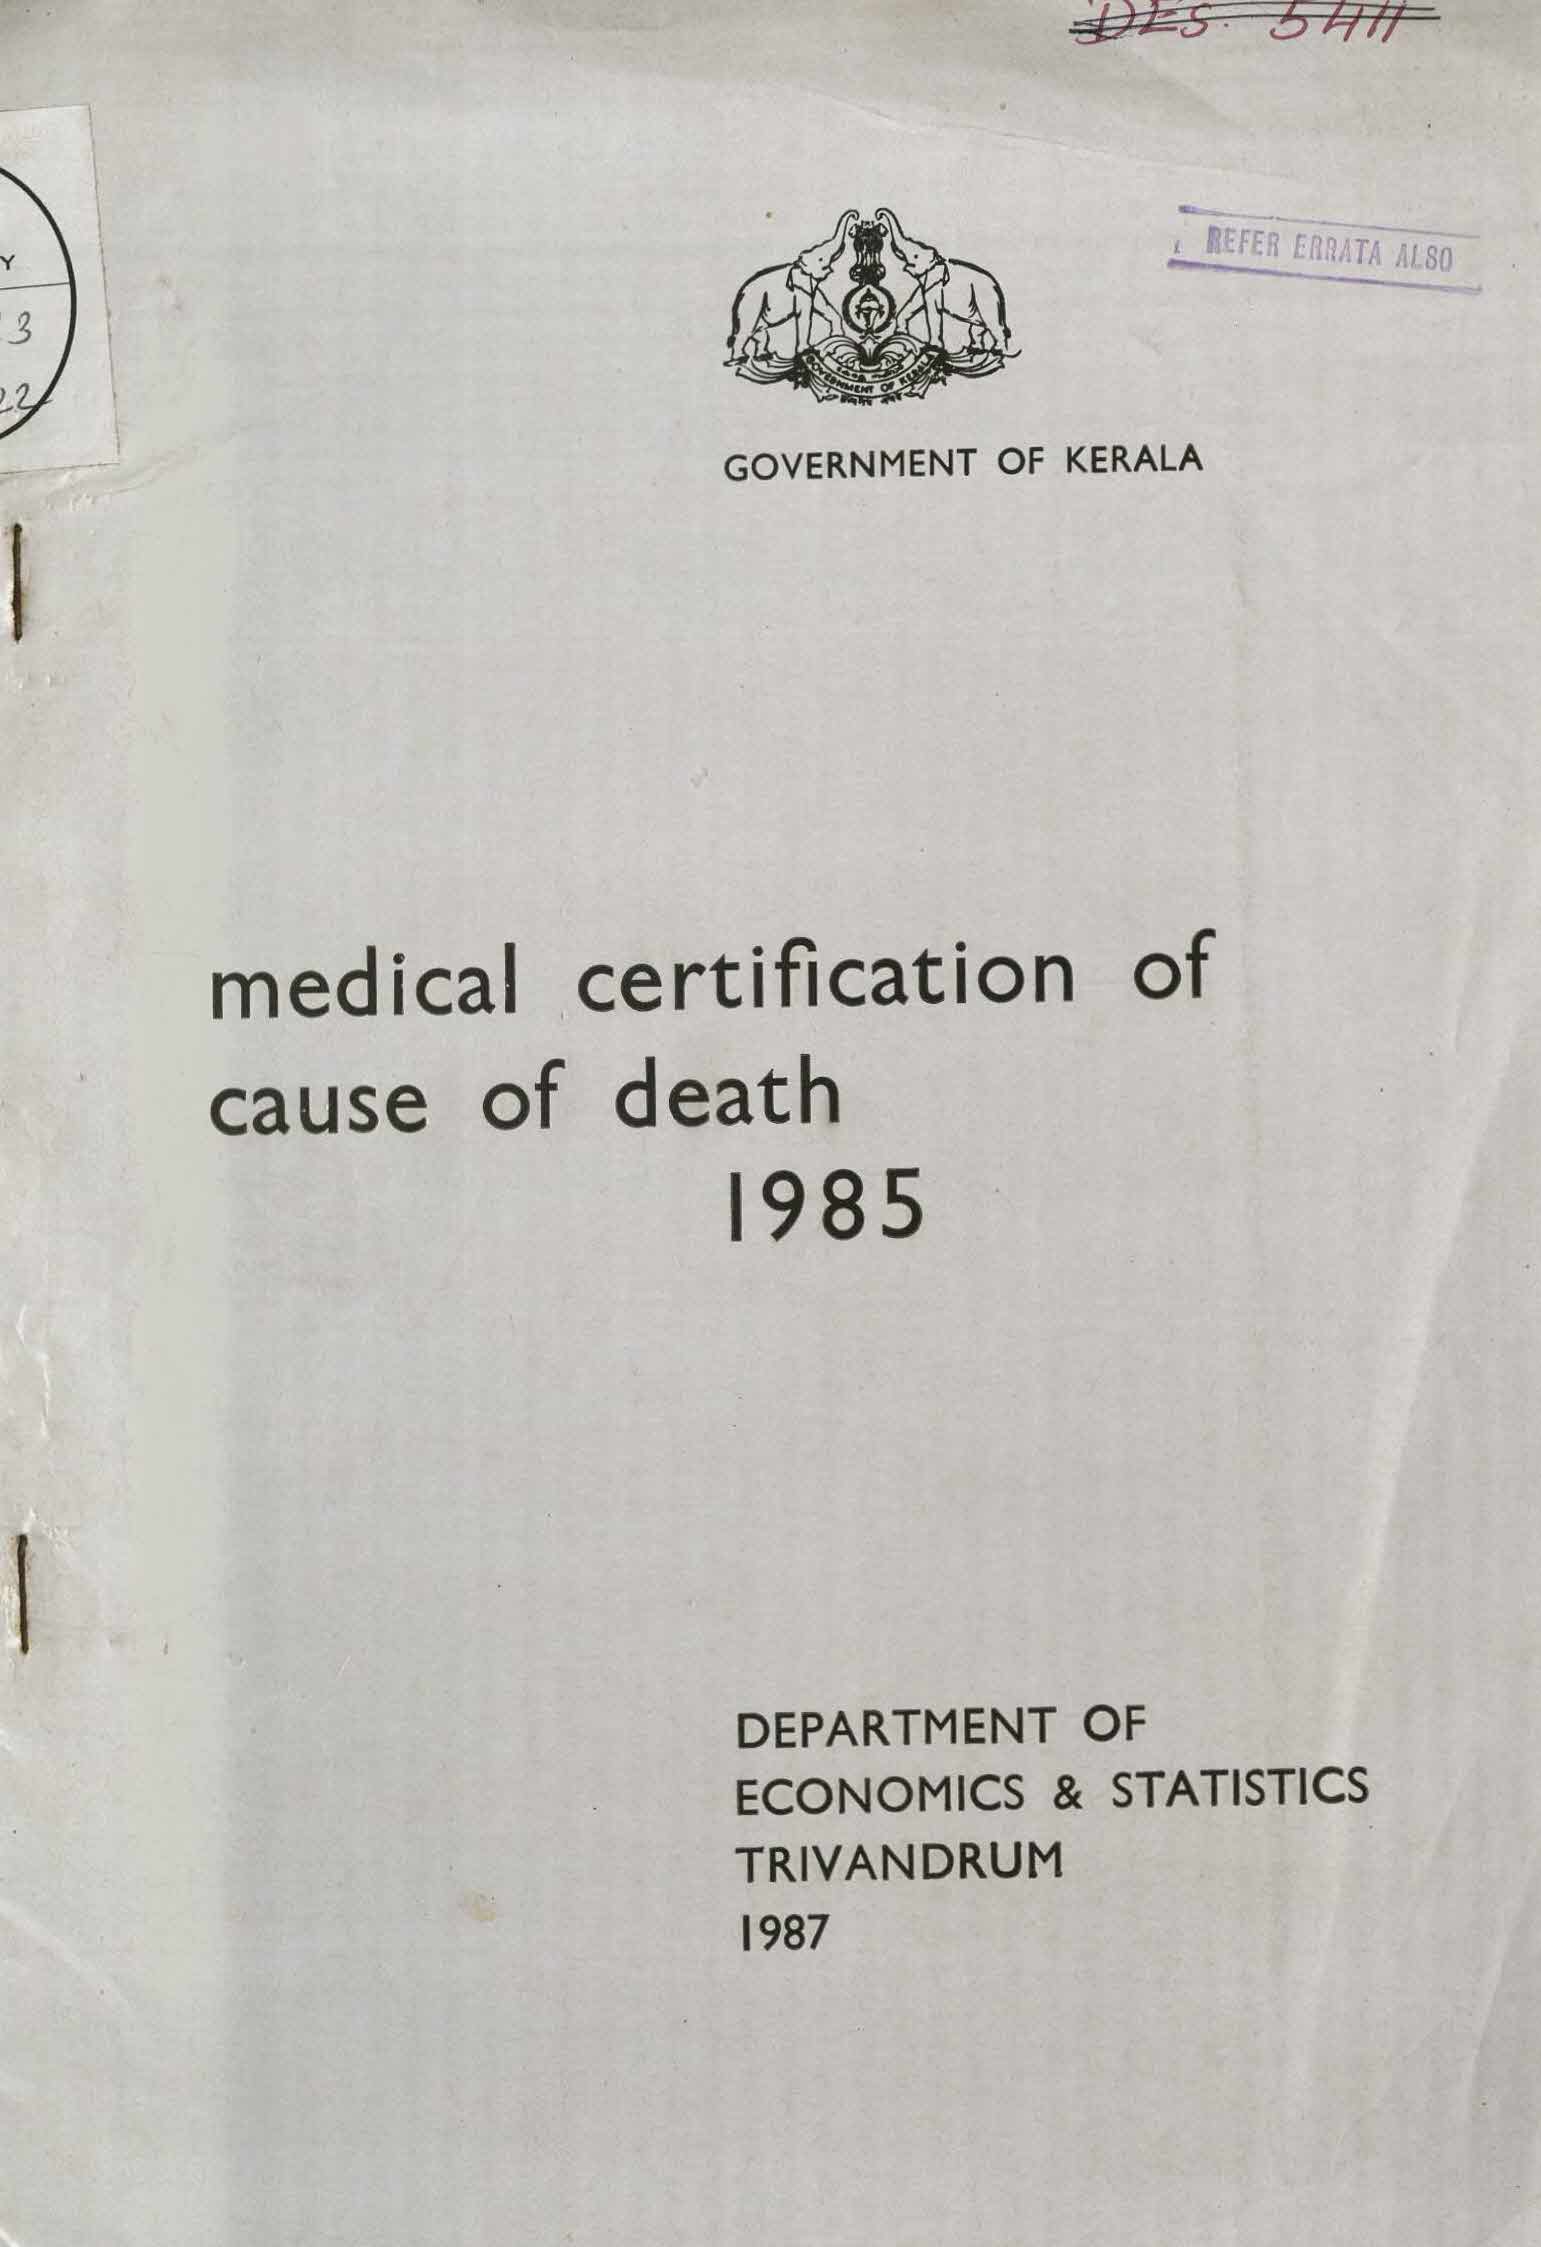 Medical Certification of Cause of death - 1985